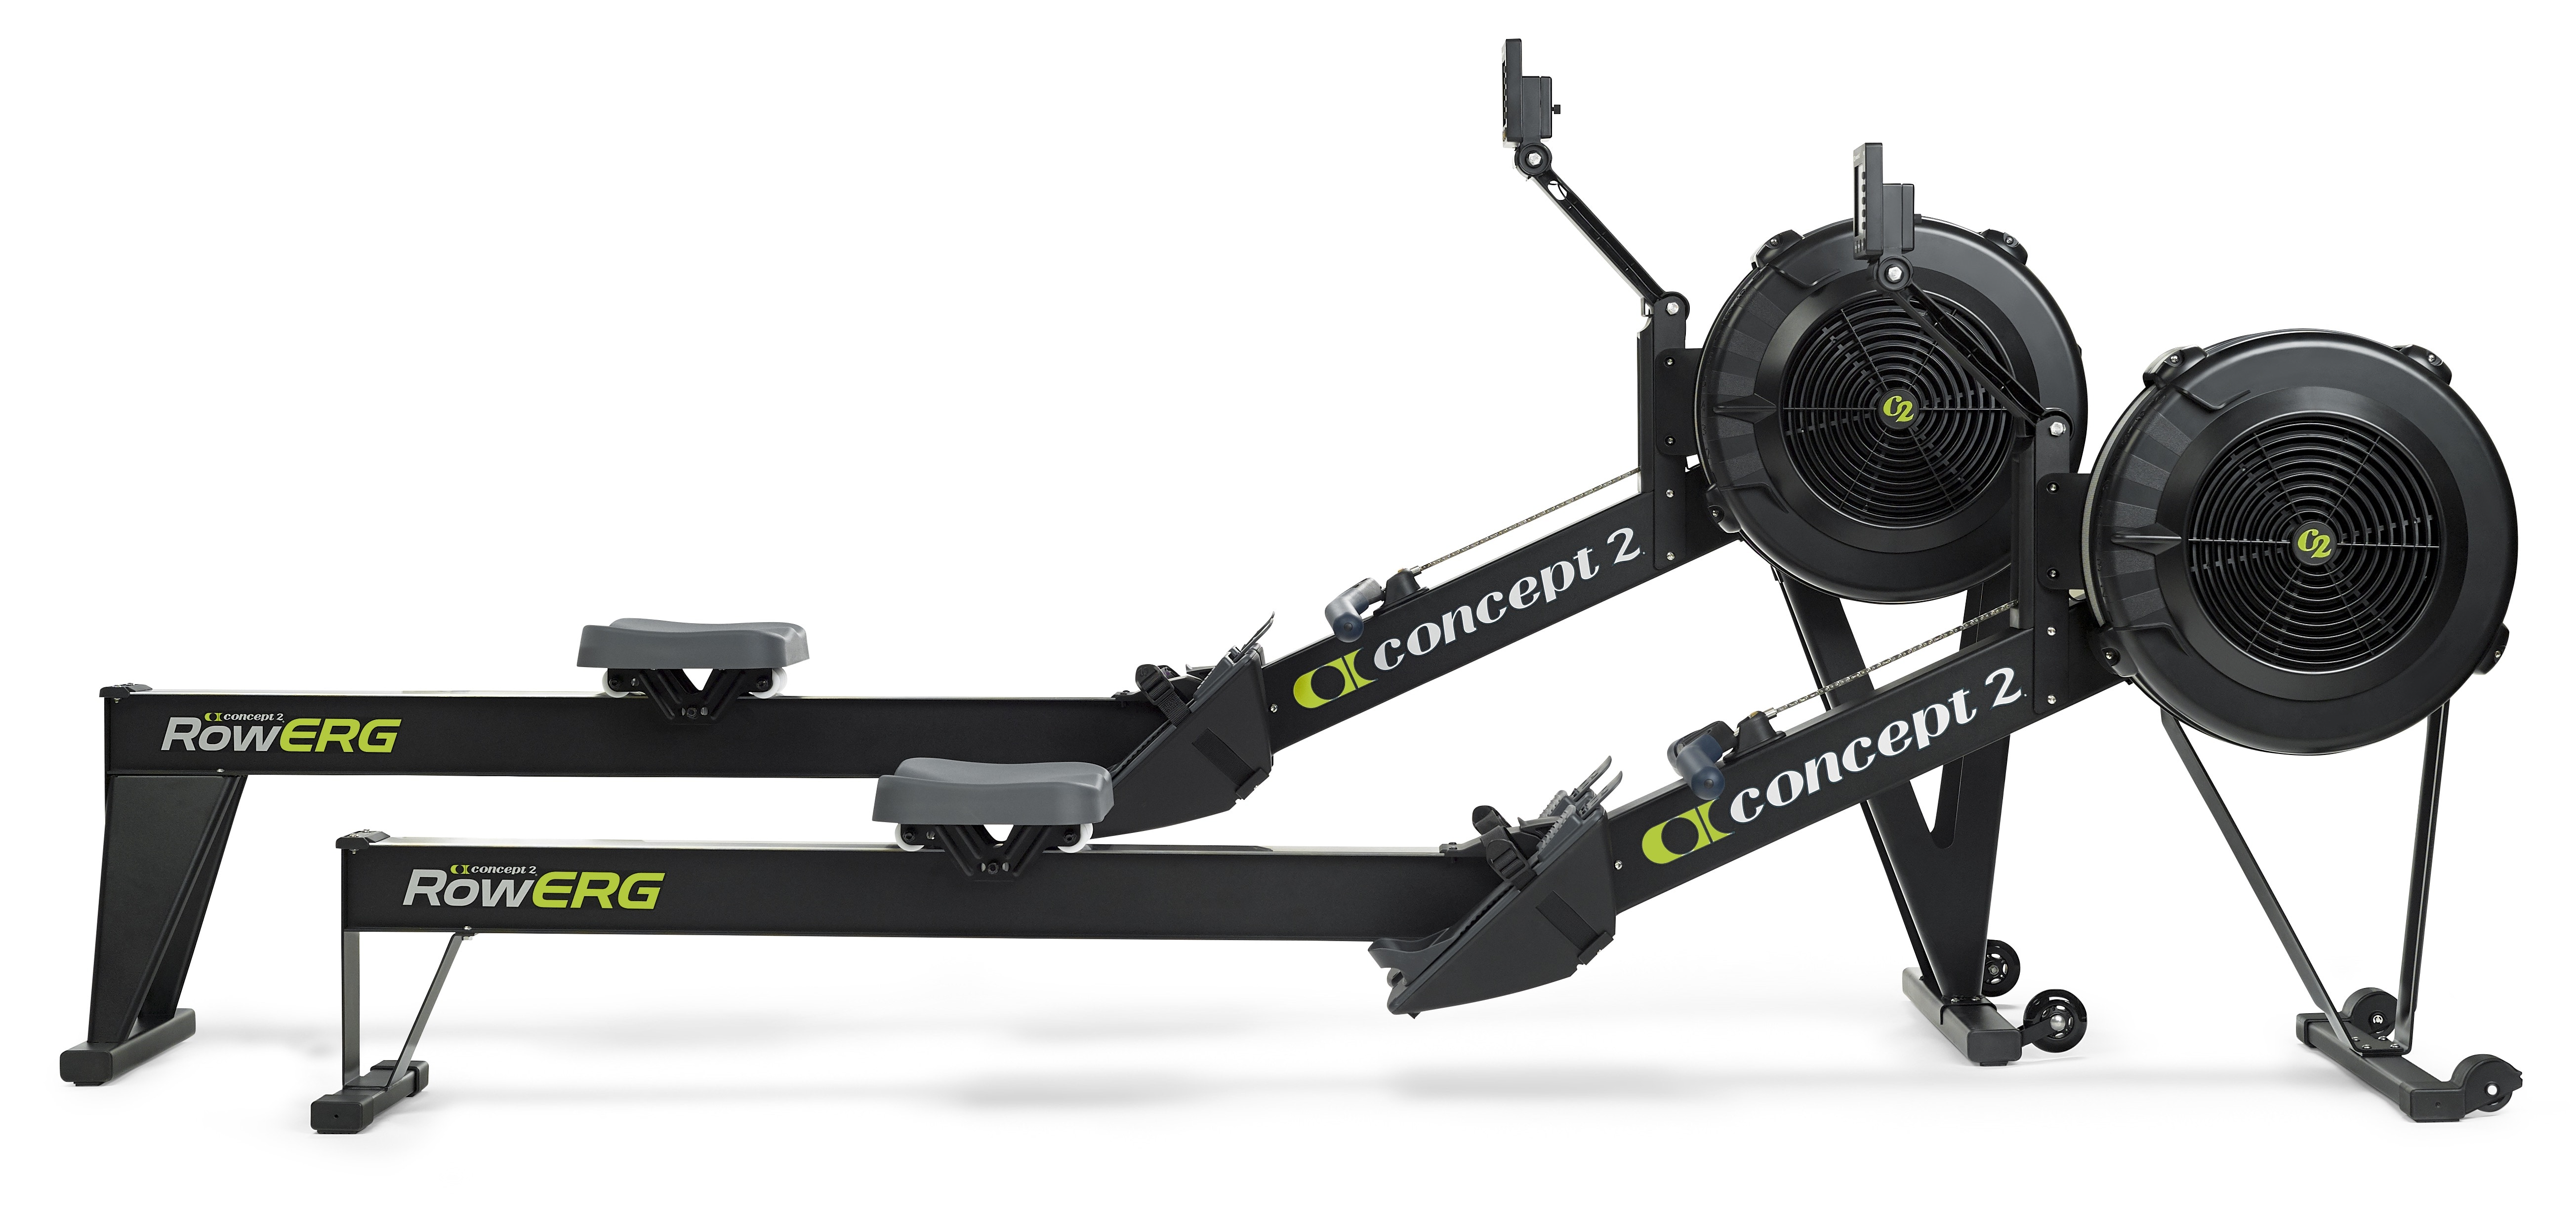 Used concept 2 rowing